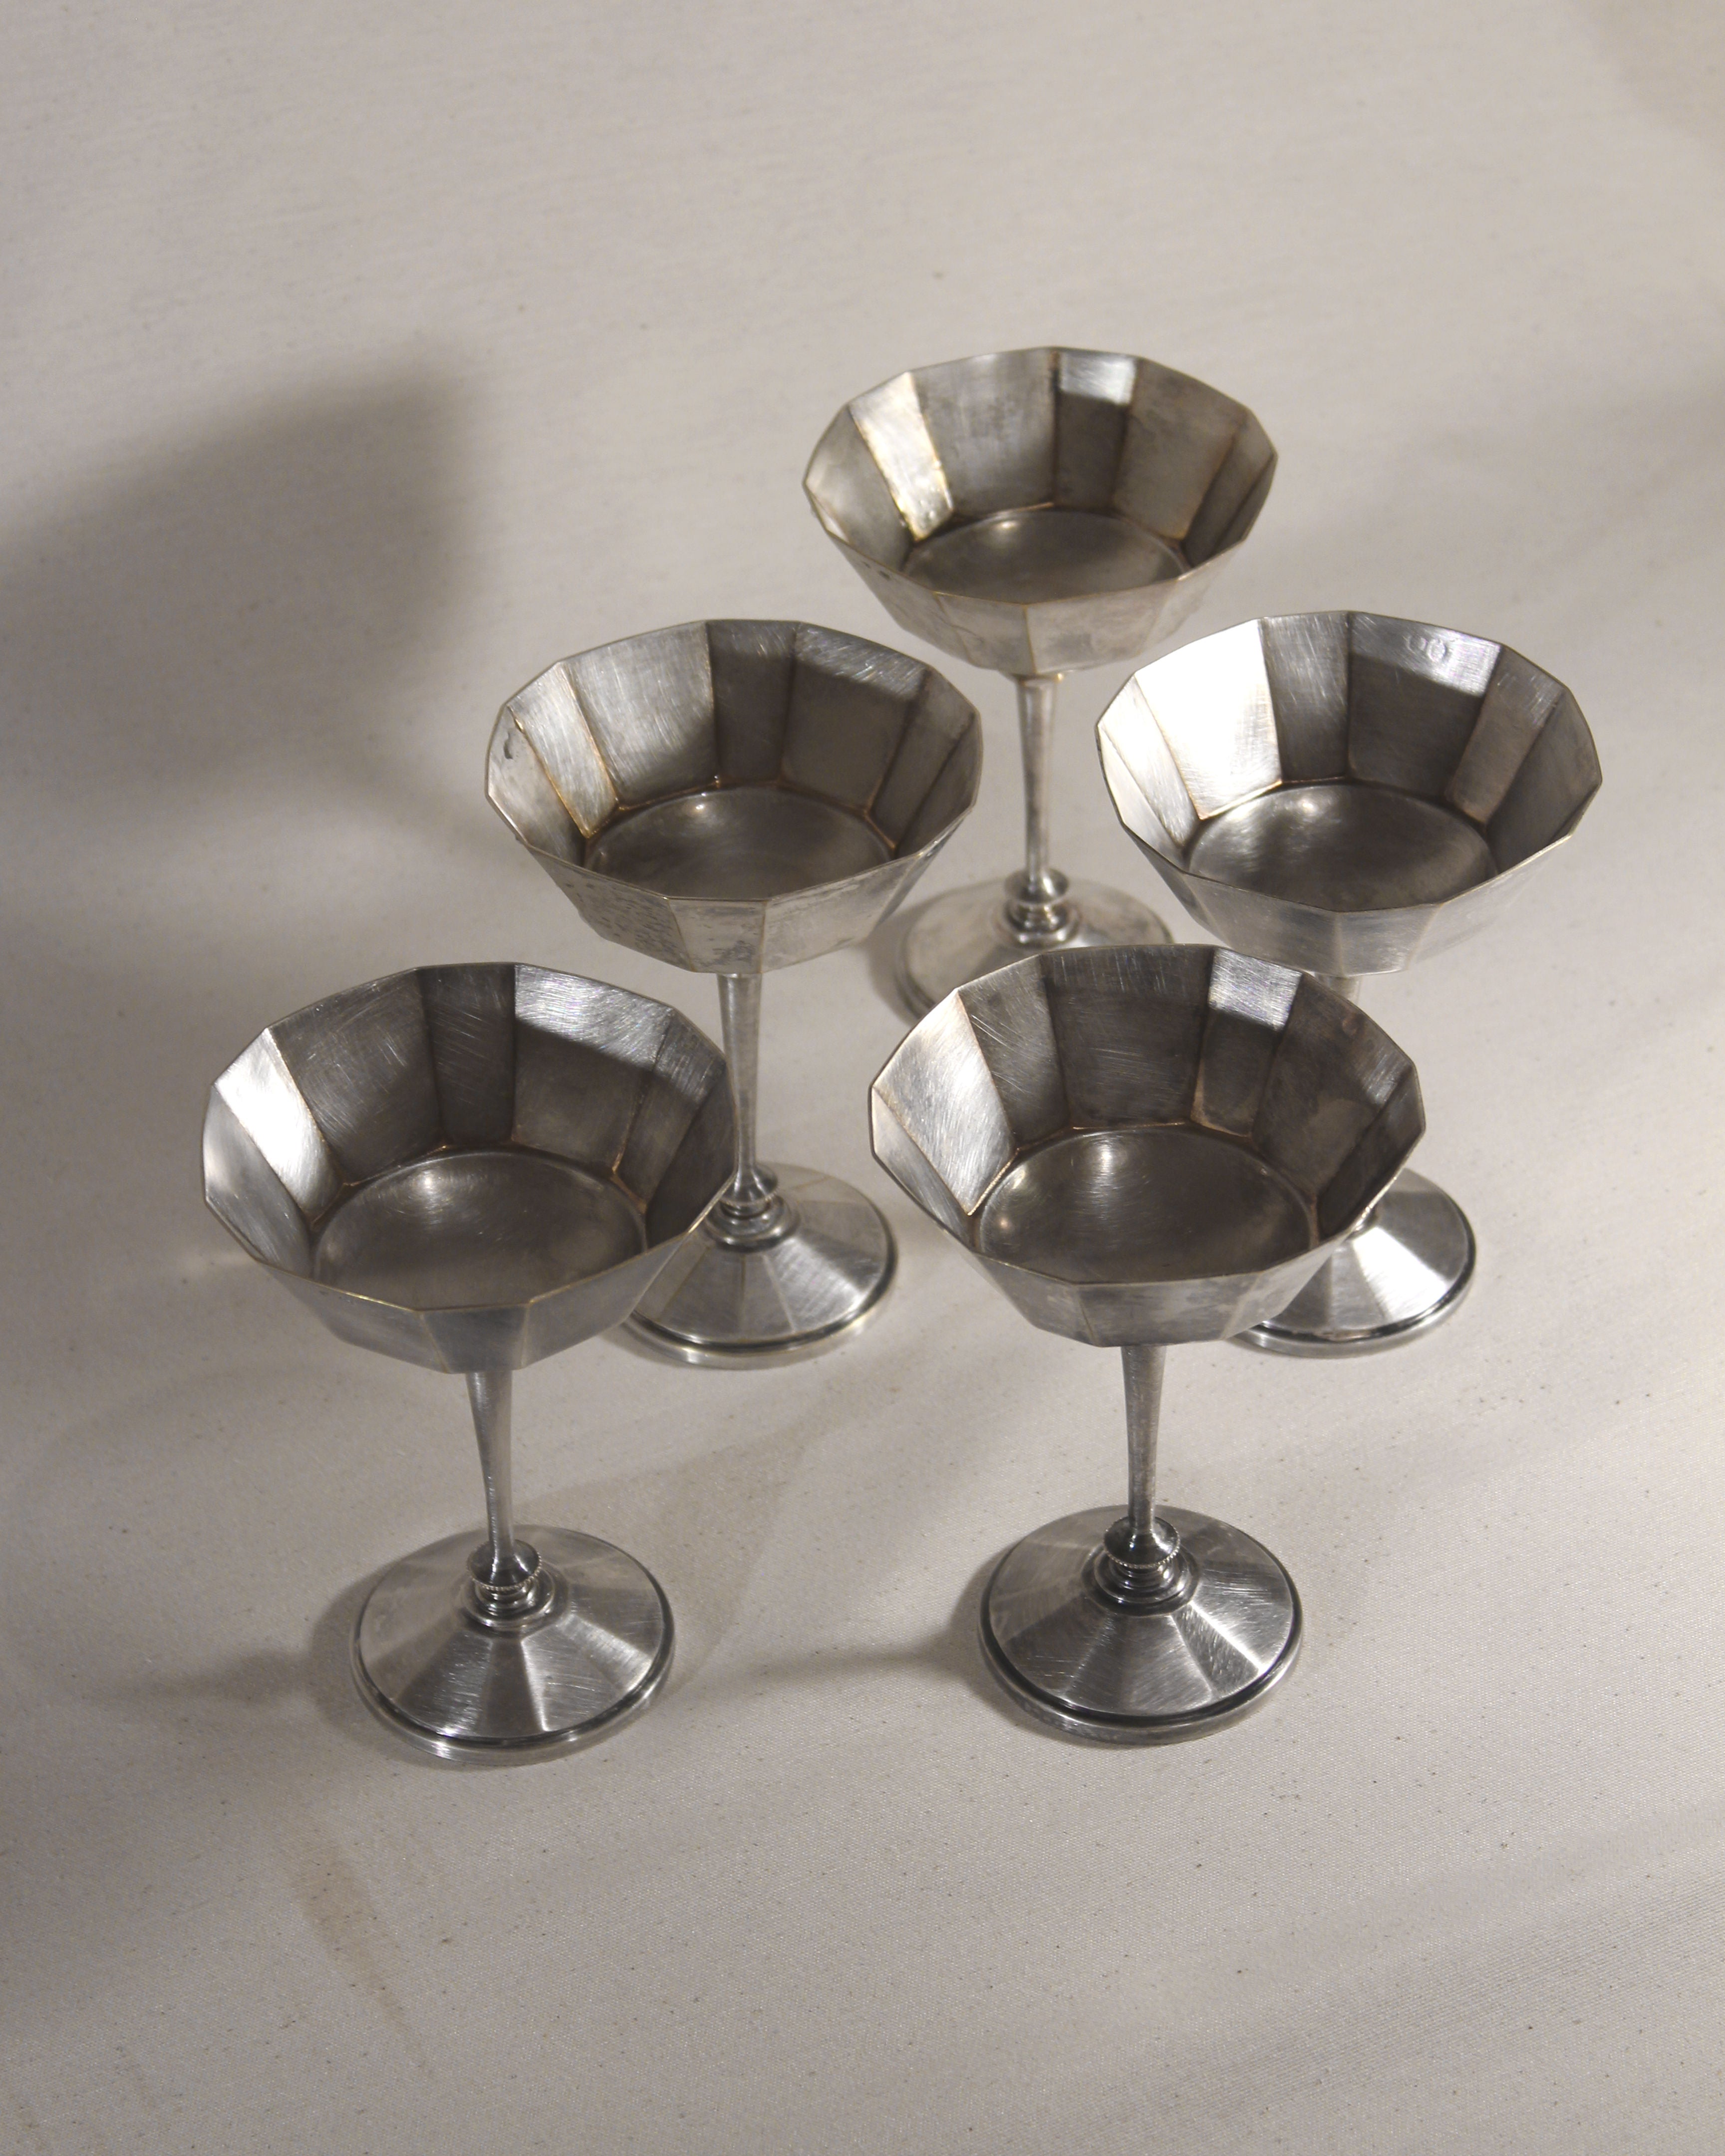 Set of 5 Champagne Glasses and Bucket